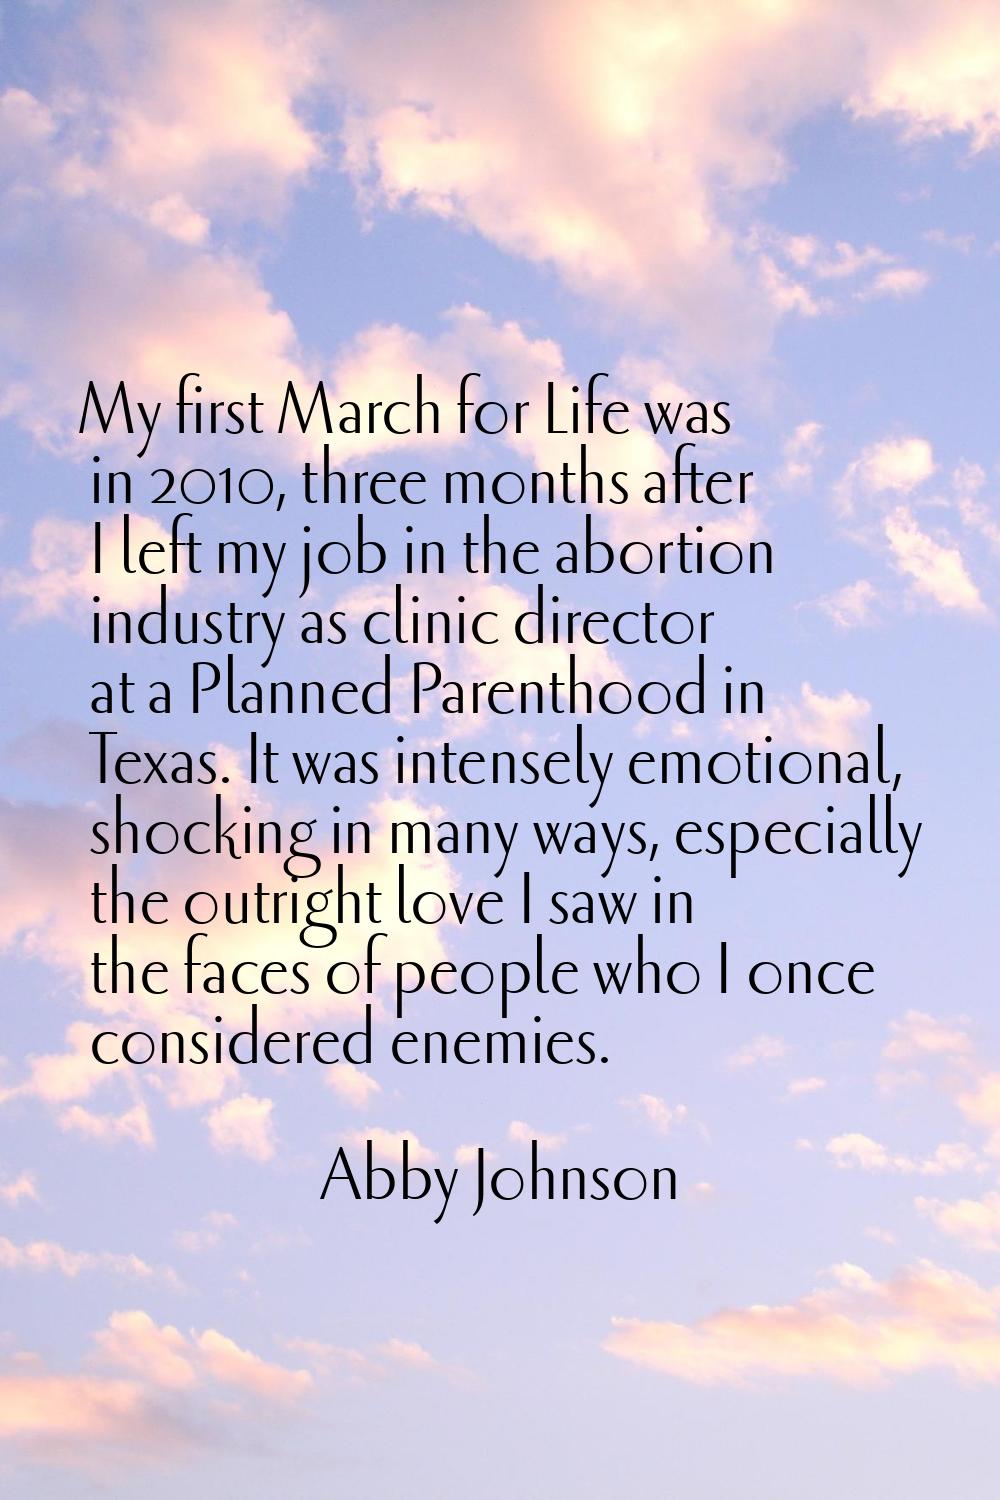 My first March for Life was in 2010, three months after I left my job in the abortion industry as c